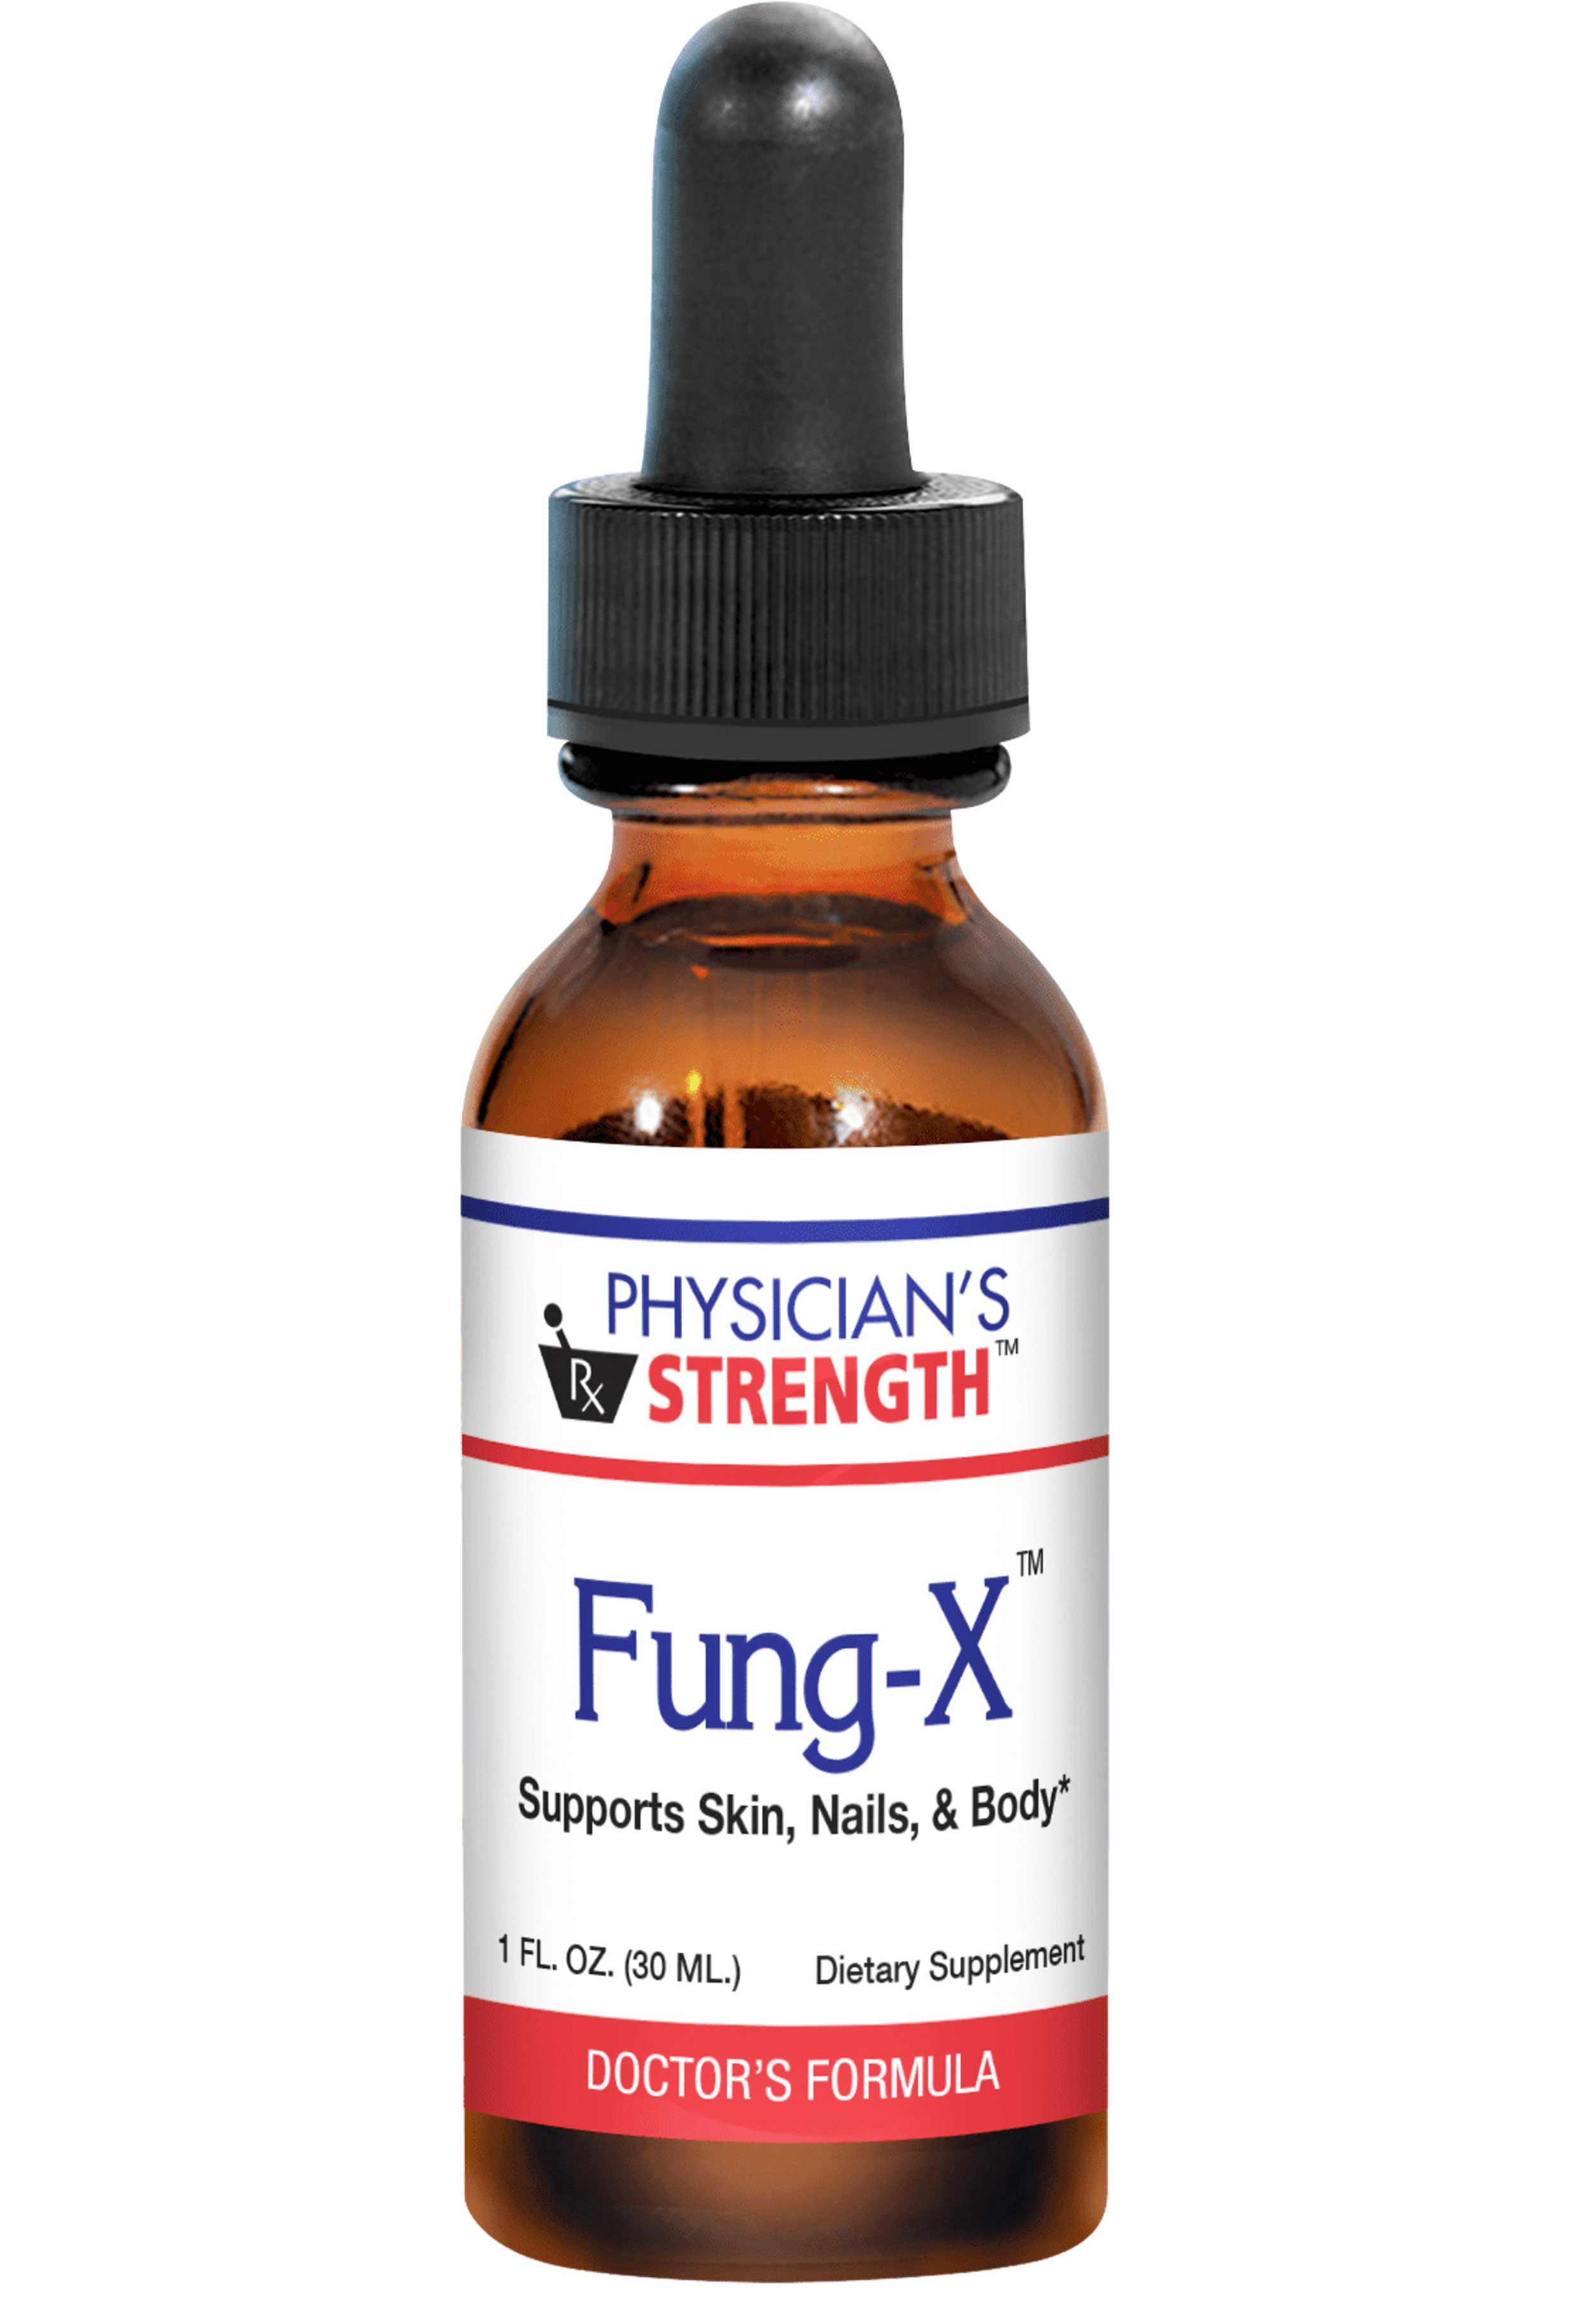 Physician's Strength Fung-X